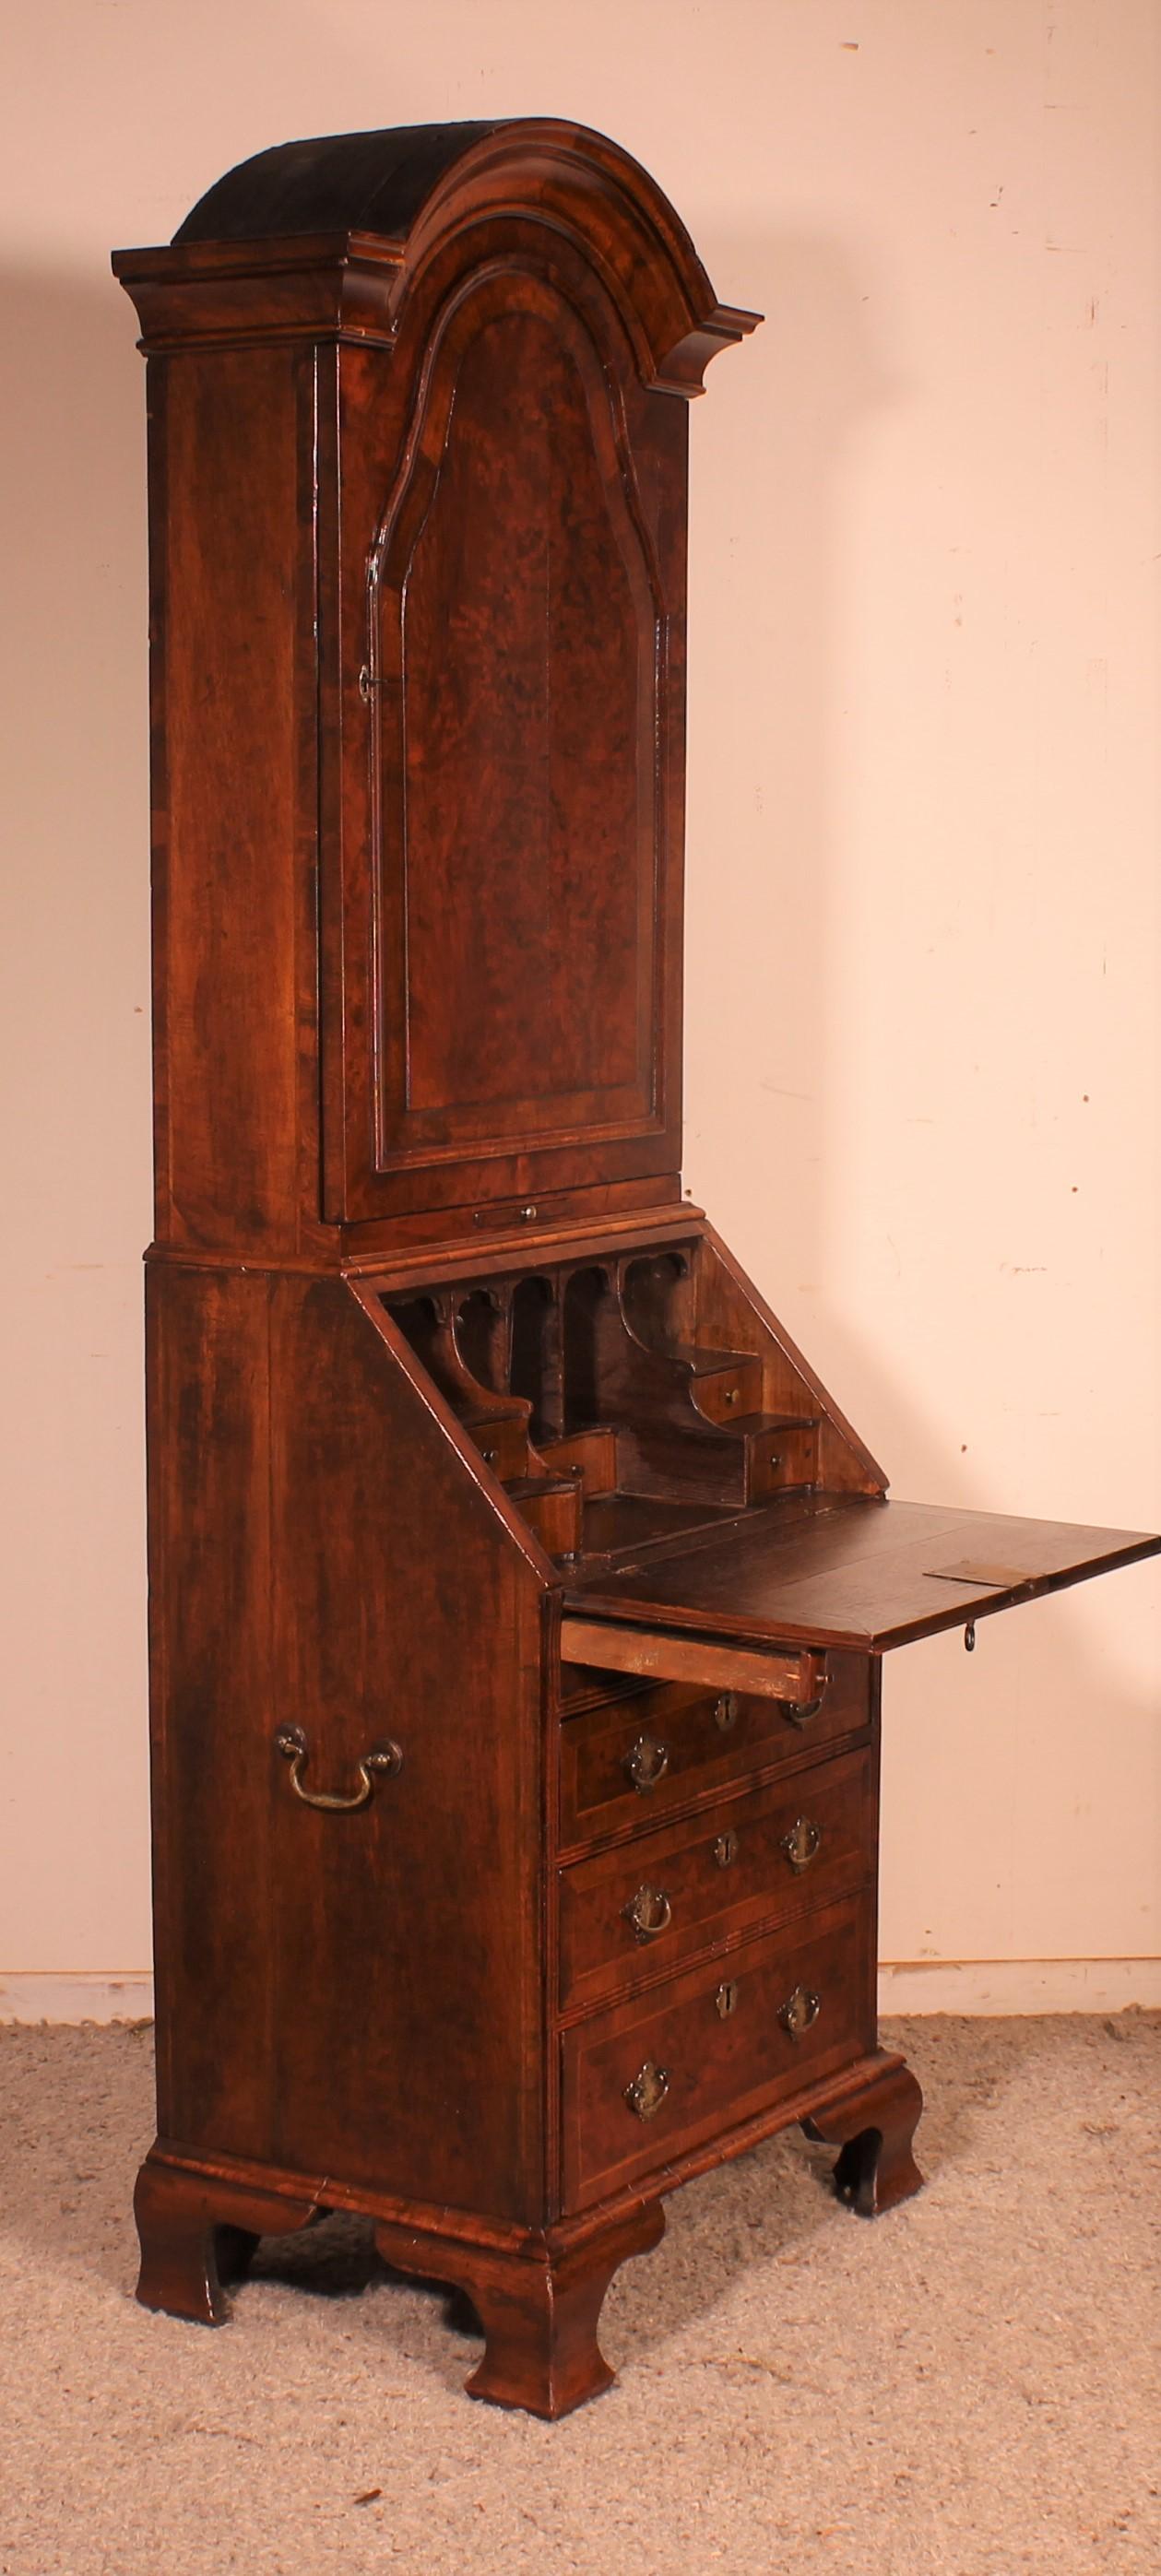 Small Secretary or Cabinet in Burl Walnut with Dome, 18 ° Century For Sale 5